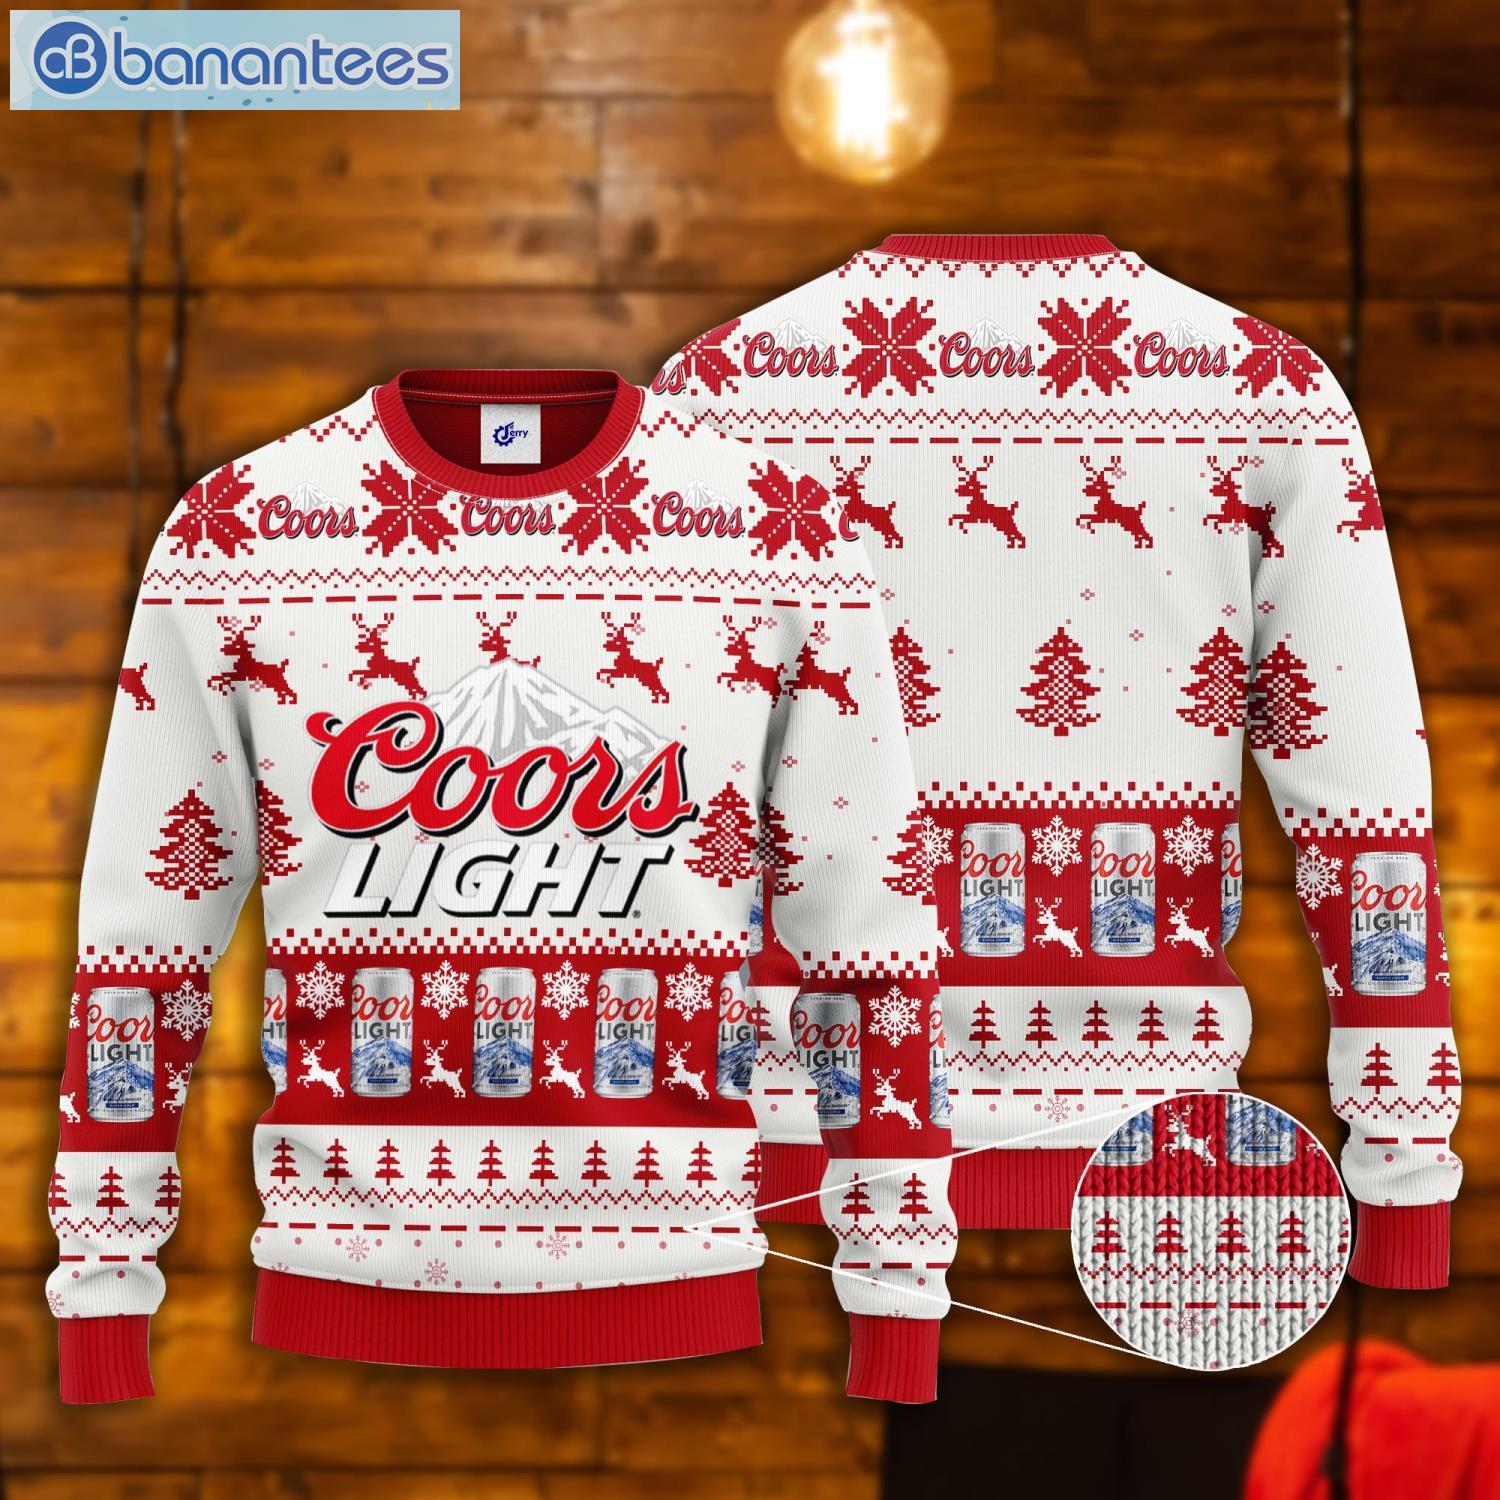 Coors Light Beers It's In My DNA Ugly Christmas Sweater Gift For Men And  Women - Banantees